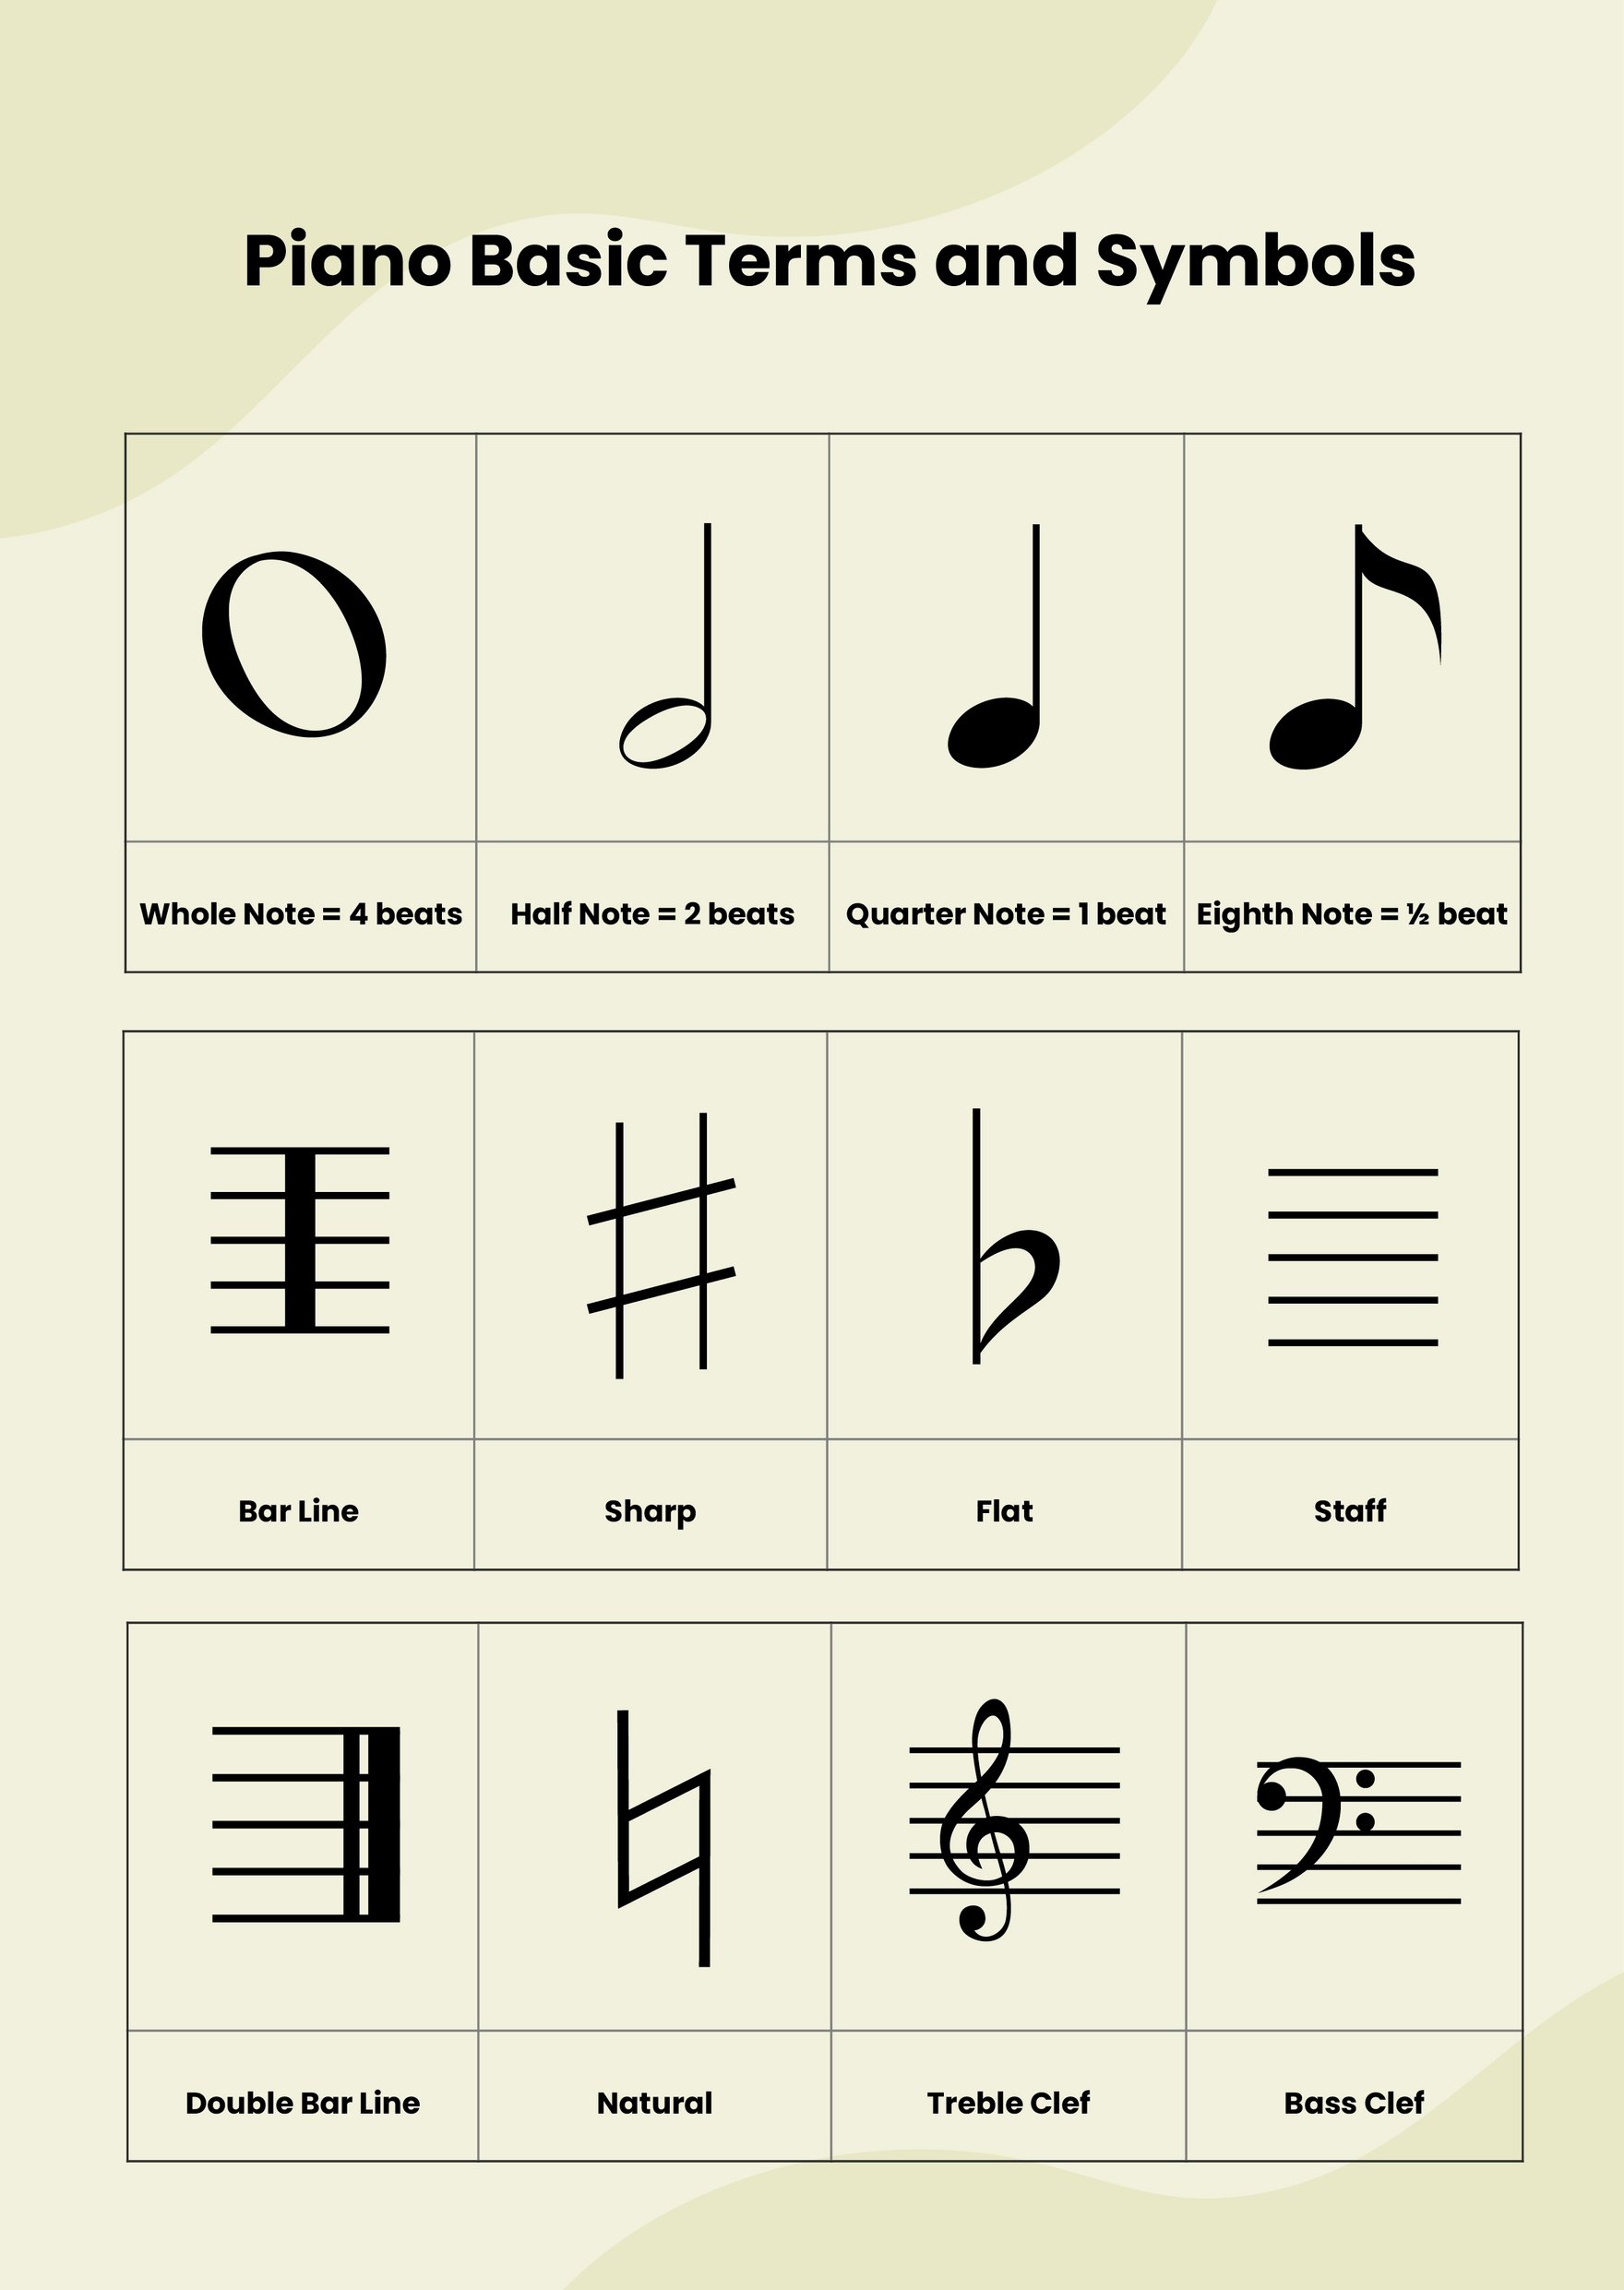 Piano Music Theory Notes Chart in PDF, Illustrator